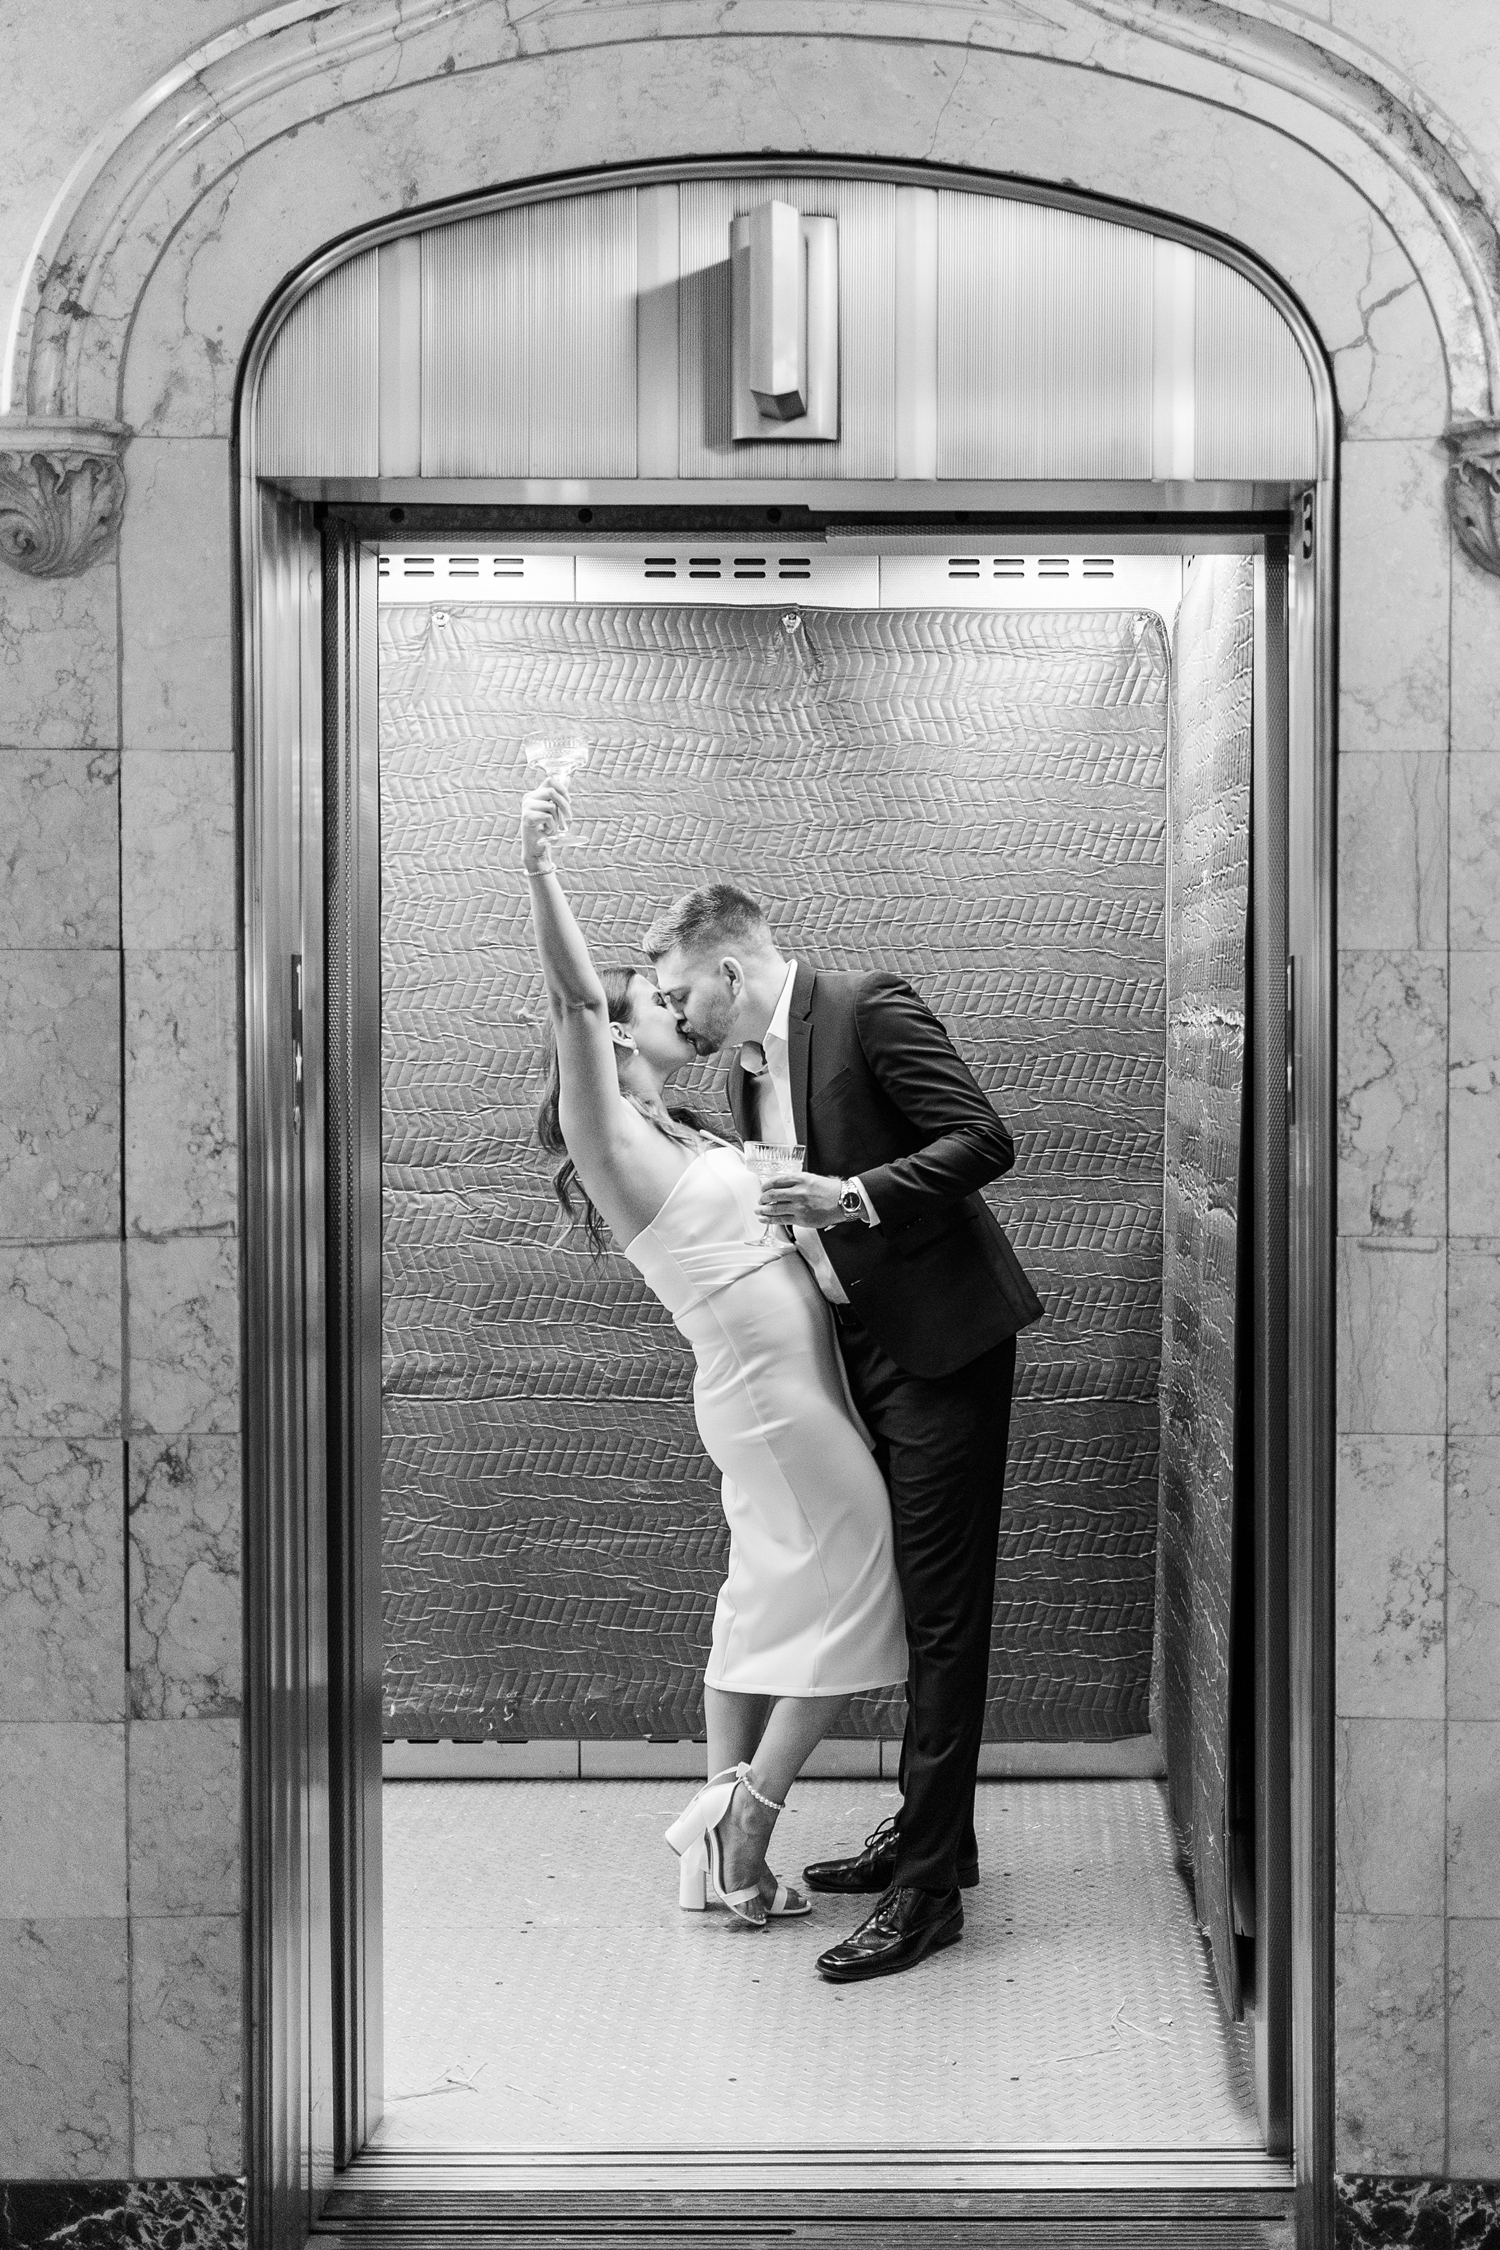 Jenna and Dustin kiss inside an elevator of The Equitable Building in Des Moines, IA while Jenna throws her champagne glass in the air | CB Studio